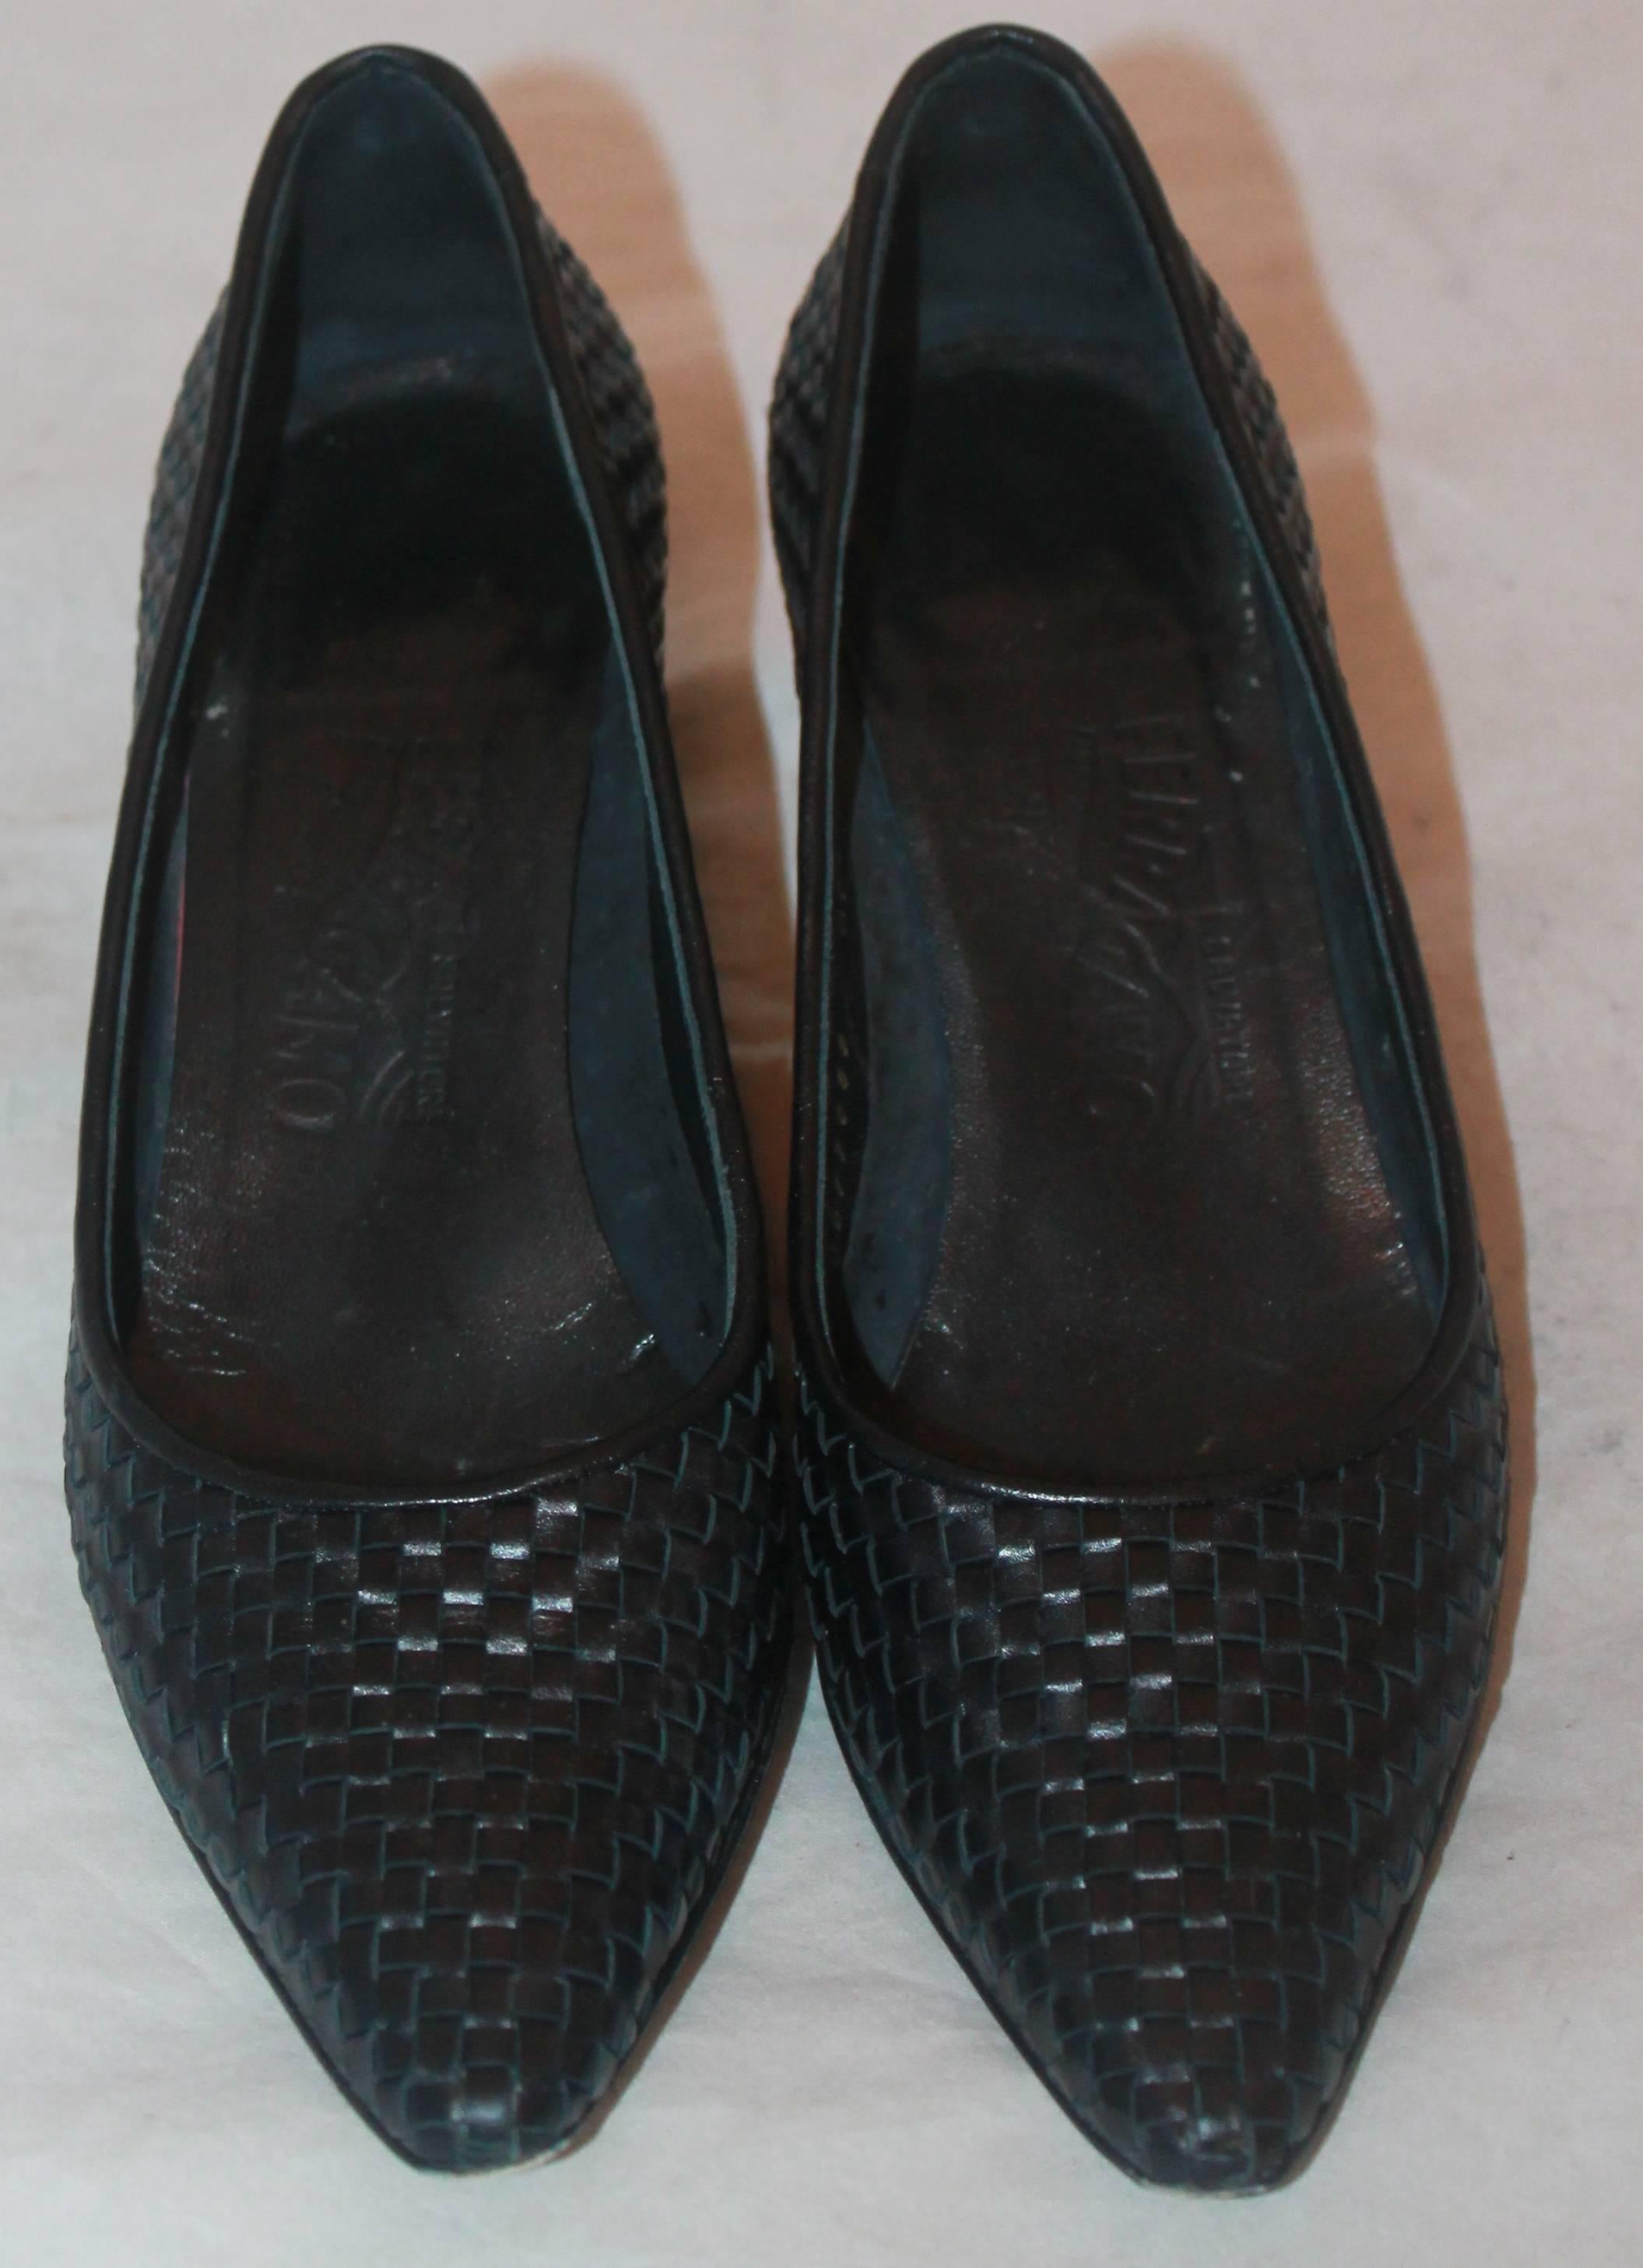 Salvatore Ferragamo Black Woven Leather Pump - 7AA In Excellent Condition For Sale In West Palm Beach, FL